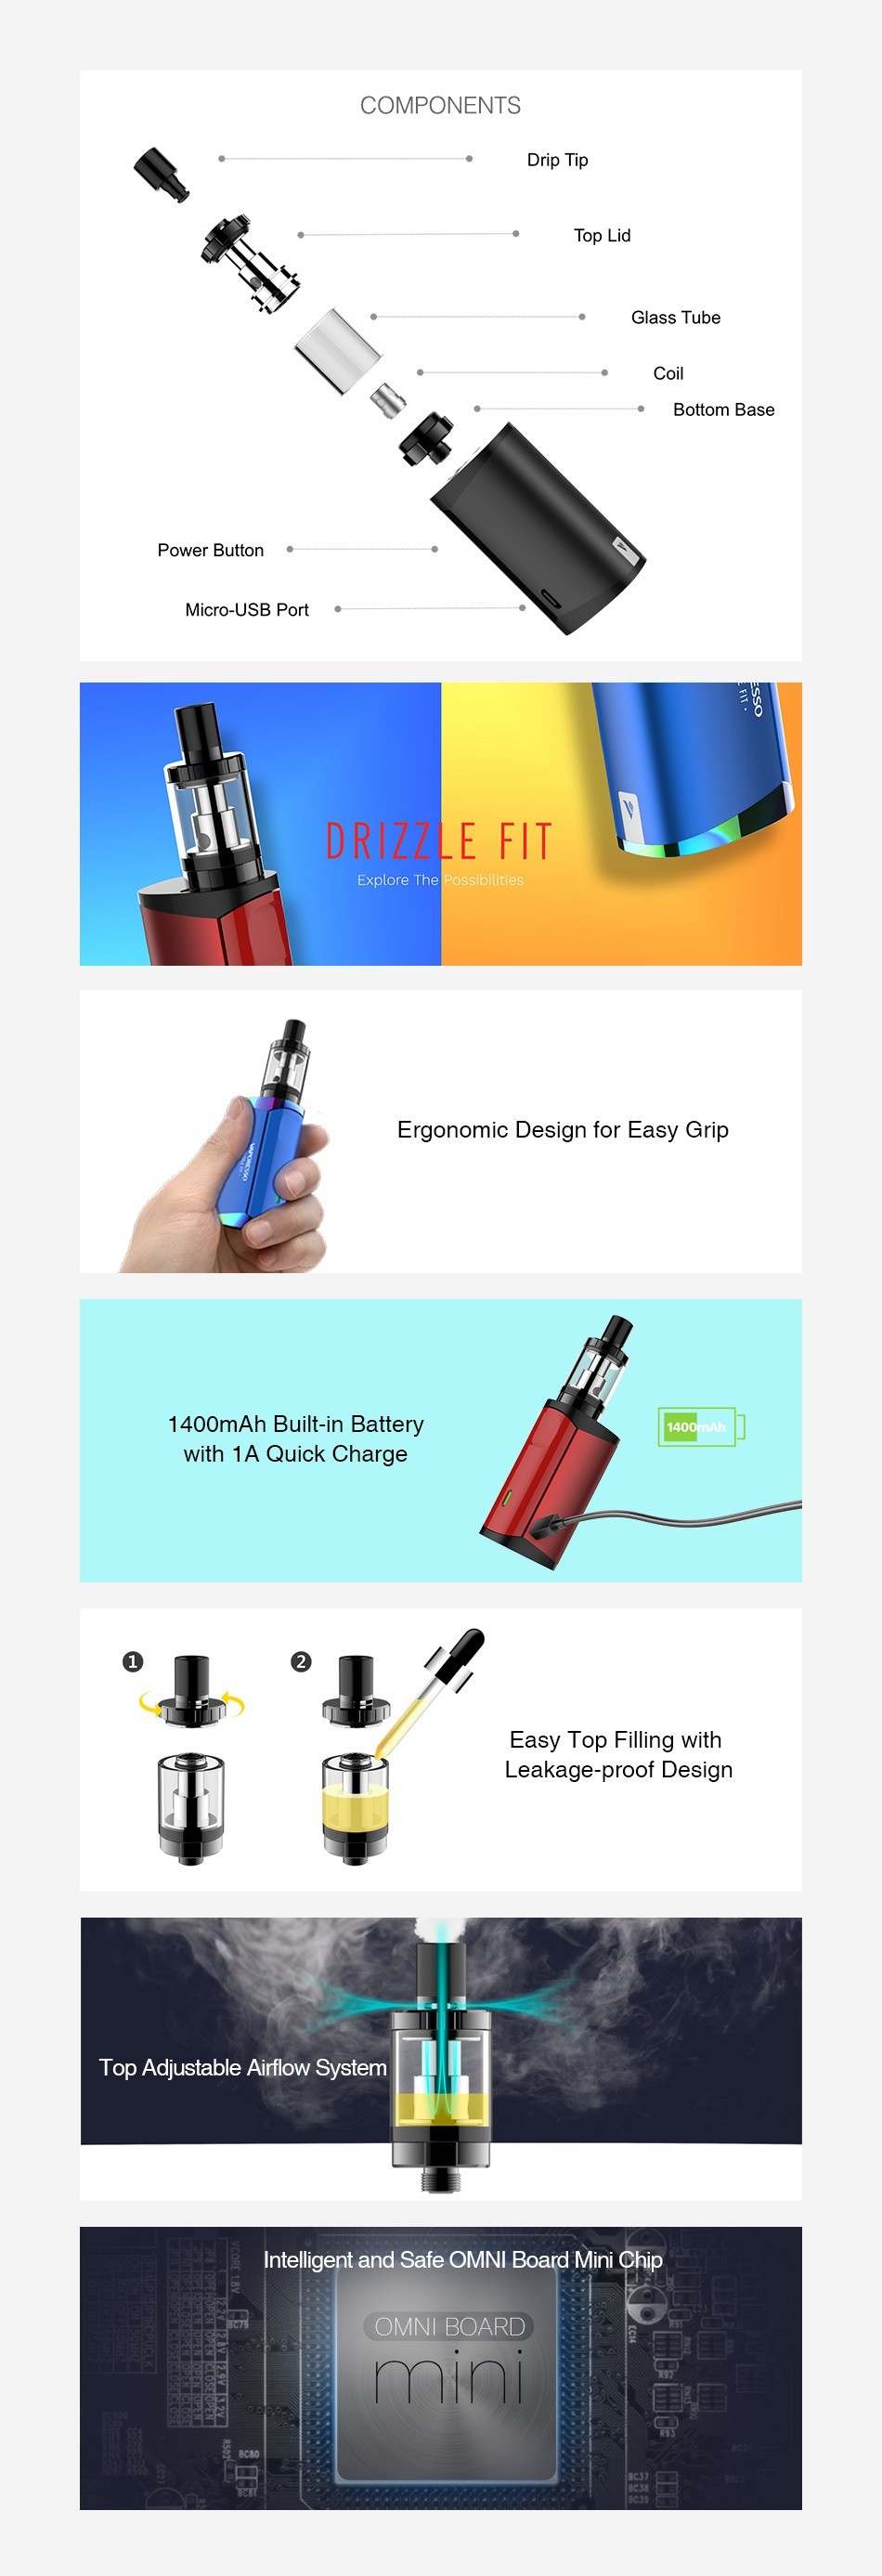 Vaporesso Drizzle Fit Starter Kit with Drizzle Tank 1400mAh COMPONENTS Drip Tip Top Li Bottom base Power Button Micro USB Port DRIZZLE FIT shiites Ergonomic Design for Easy Grip 1400mAh Built in Battery with 1A Quick Charge   Easy Top Filling with eakage proof Design Top Adjustable Airflow System a Intelligent and Safe OMNI Board Mini Chip OMNI BOARD